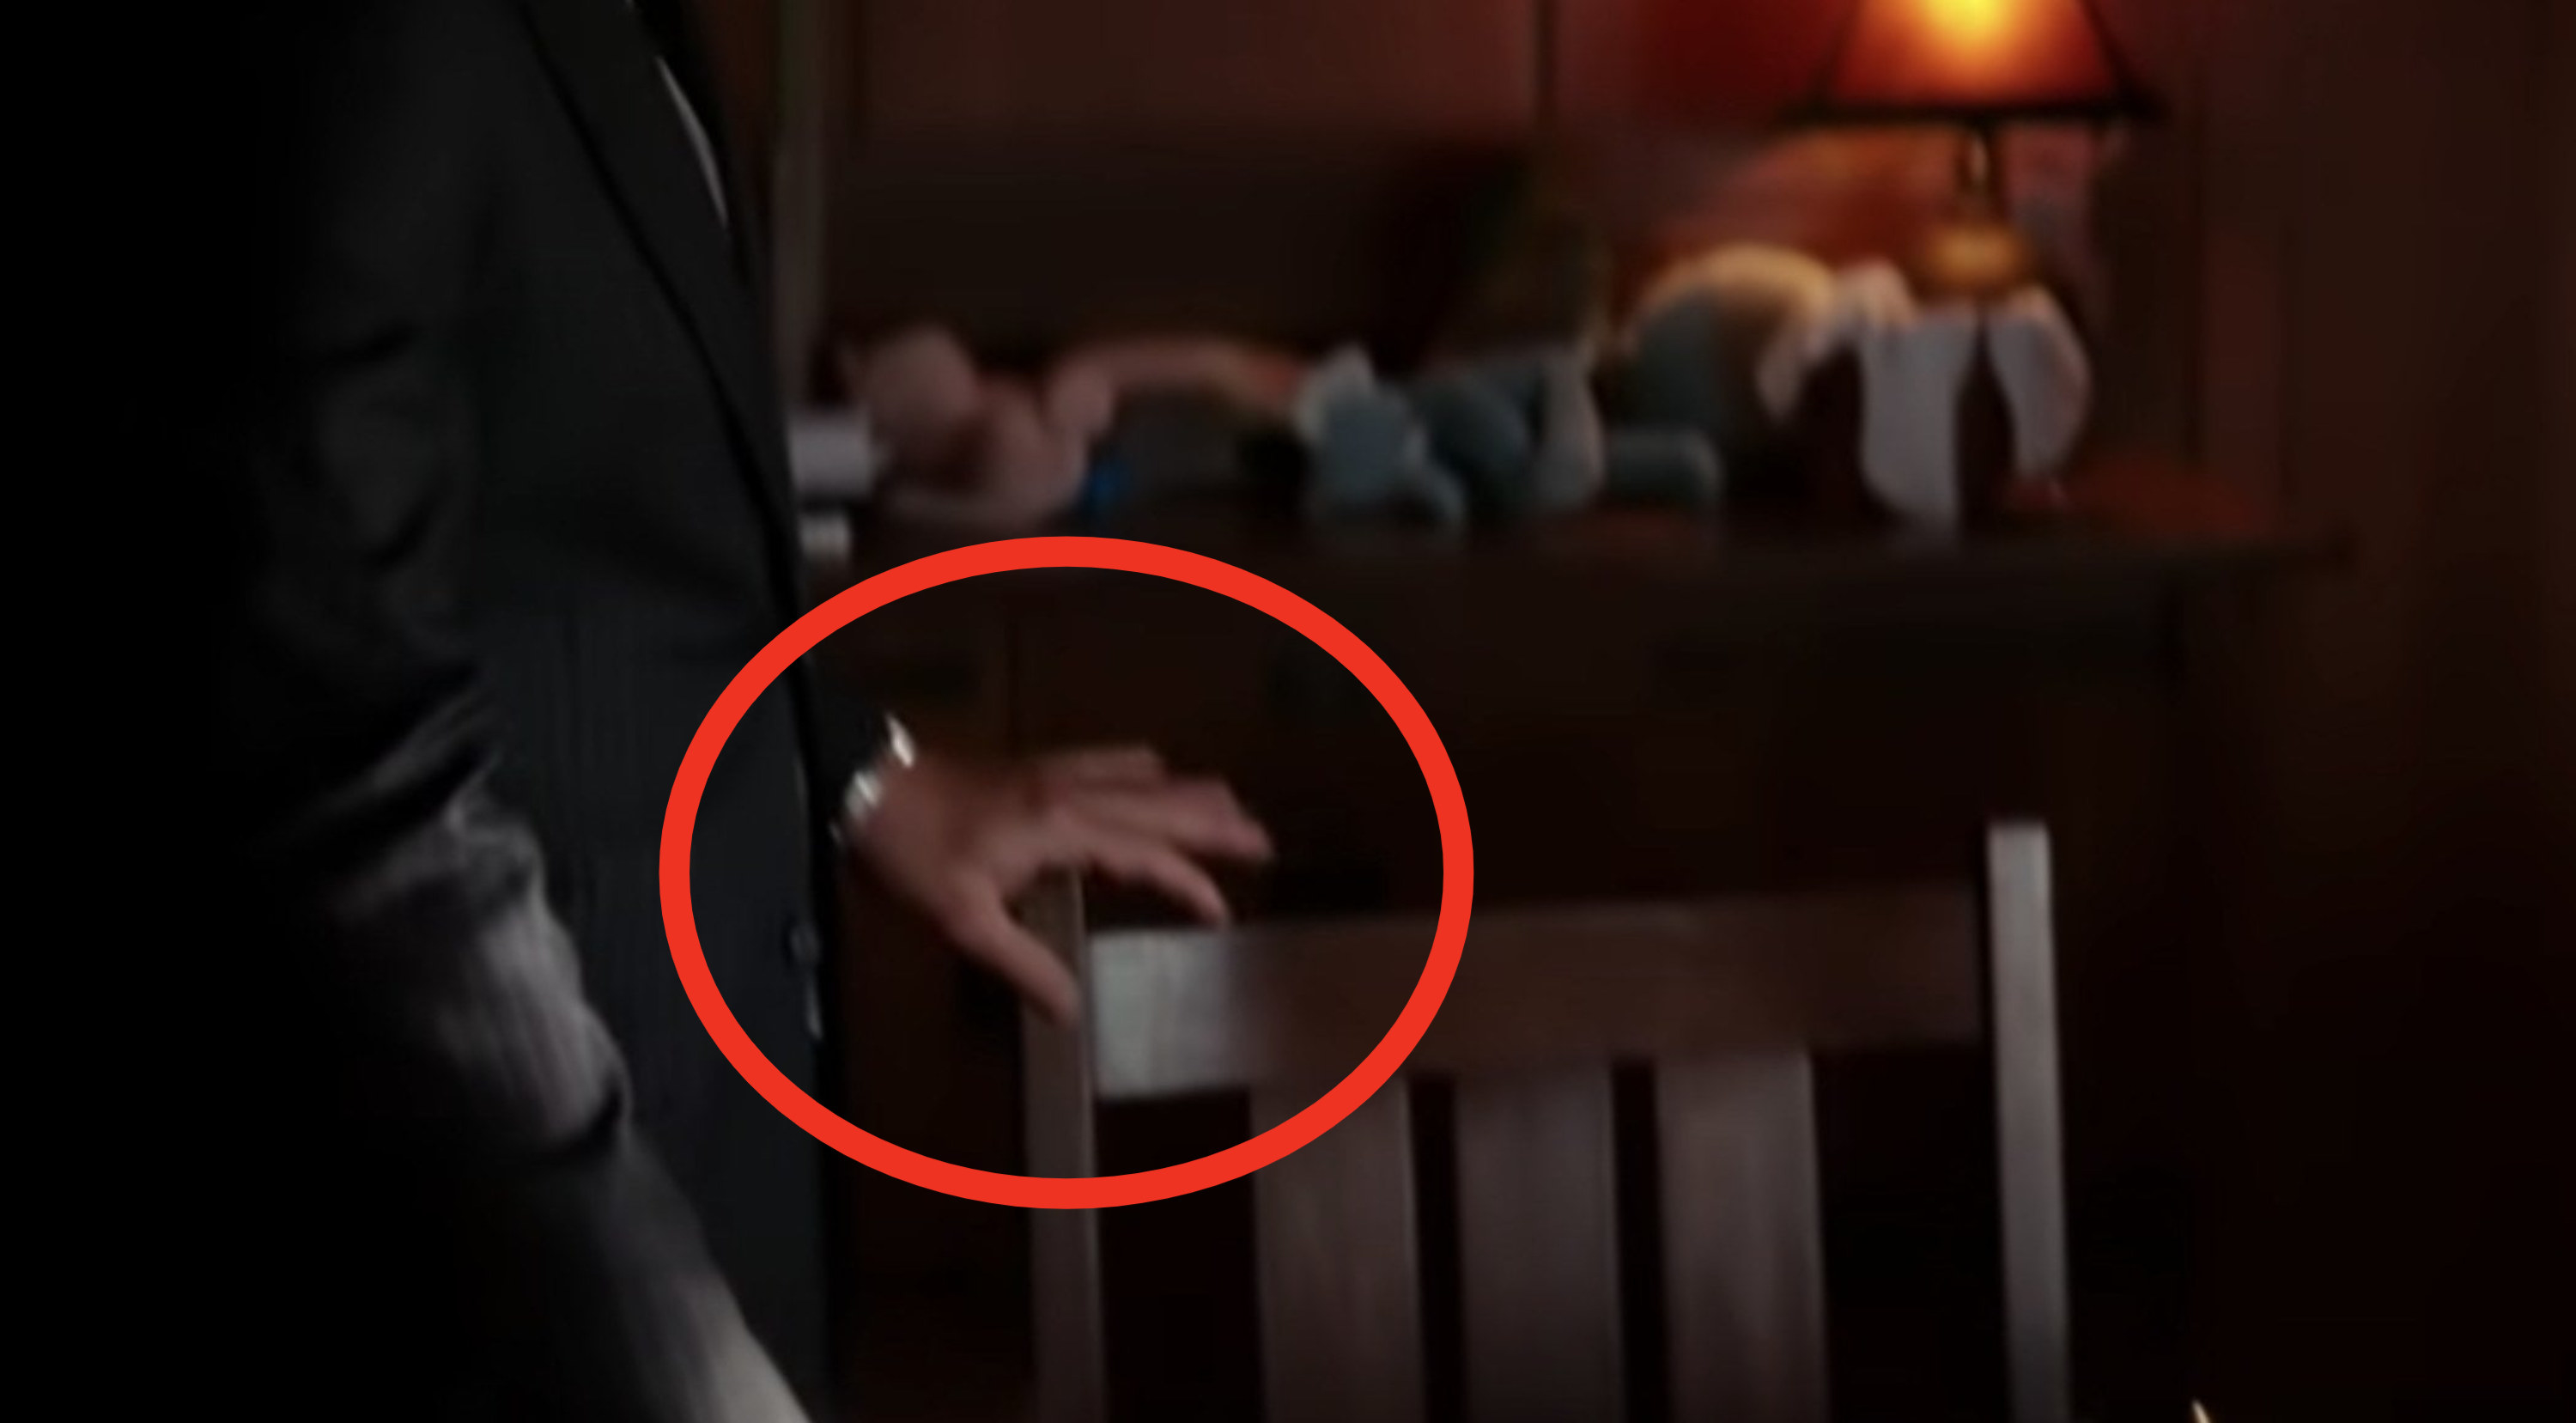 A shot of Cobb&#x27;s hand, showing no wedding ring